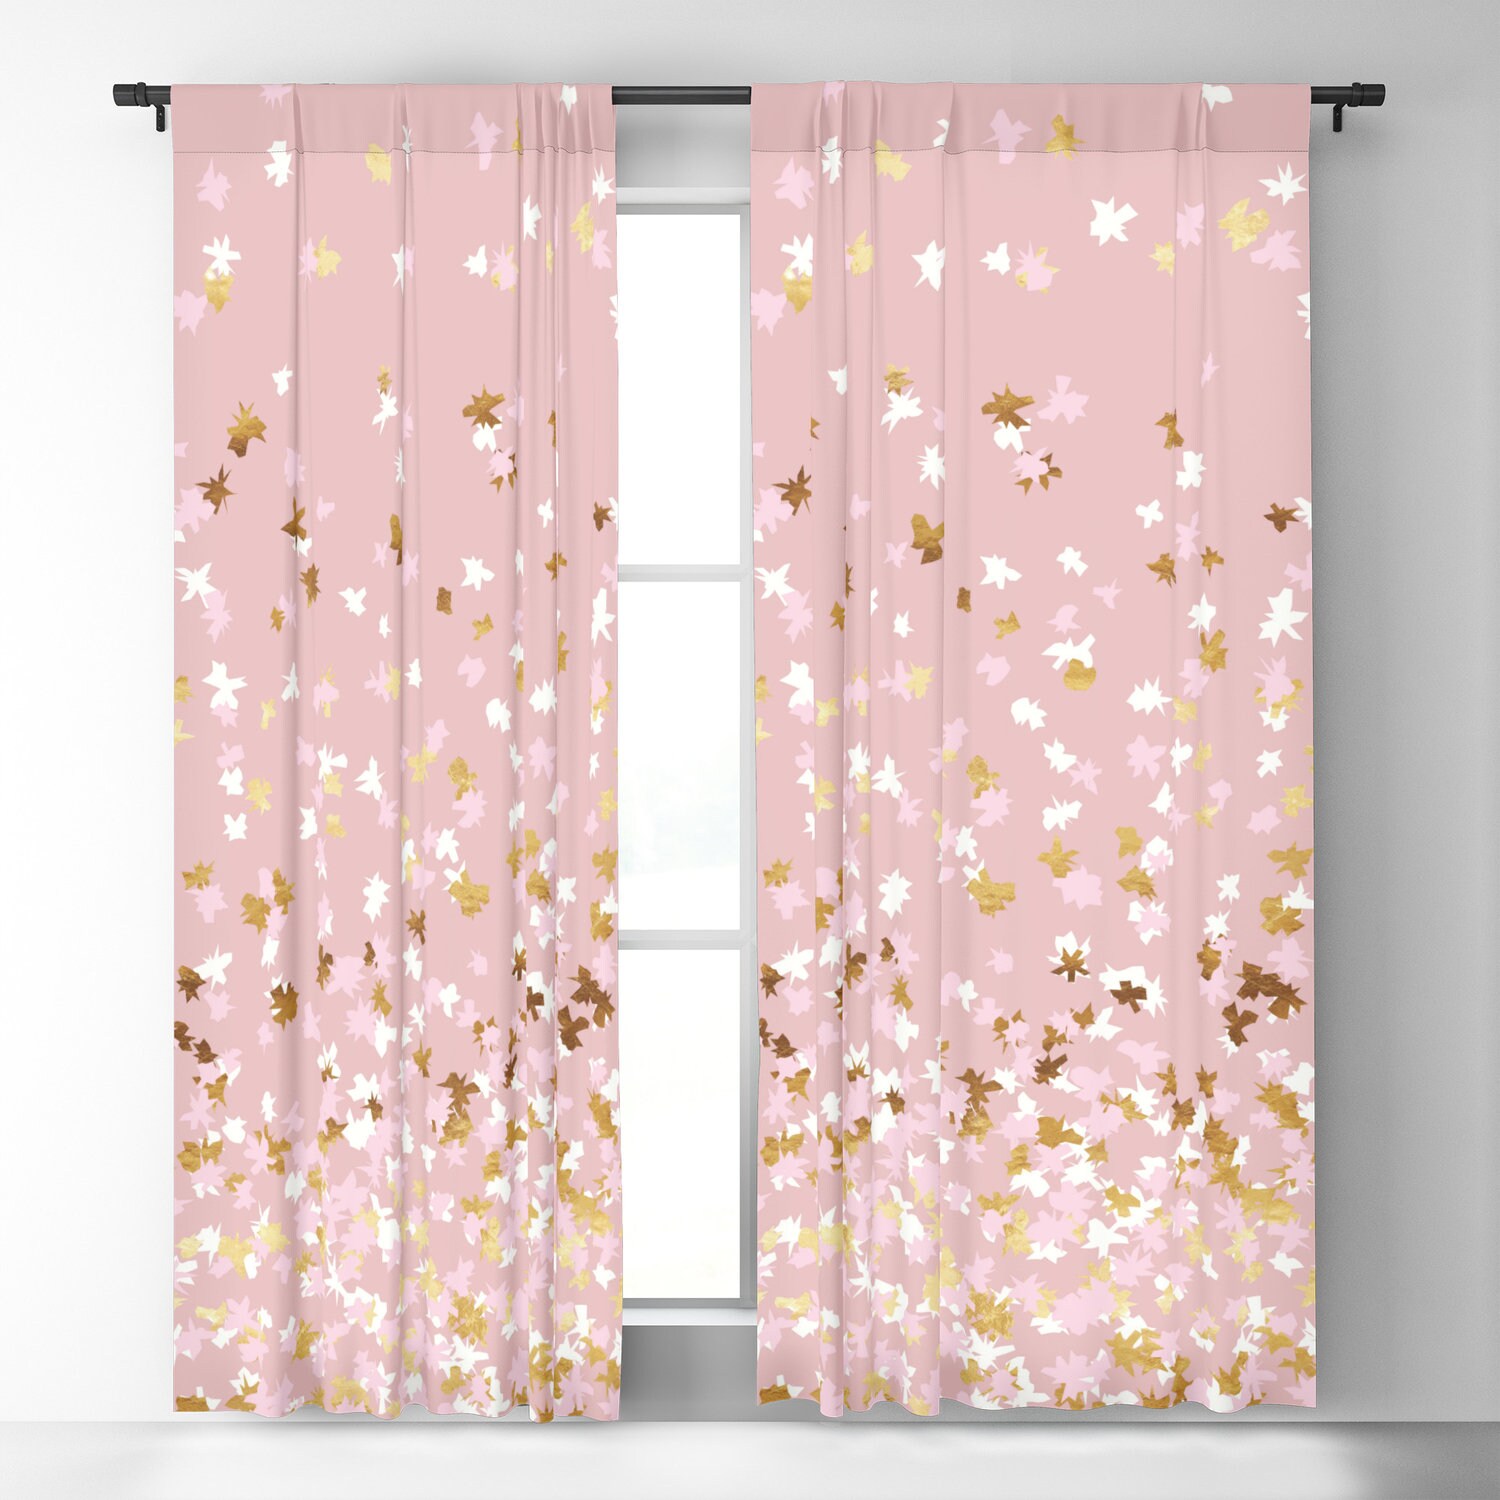 Window Curtains Floating Confetti Dots, Rose Gold Blackout Curtains Uk